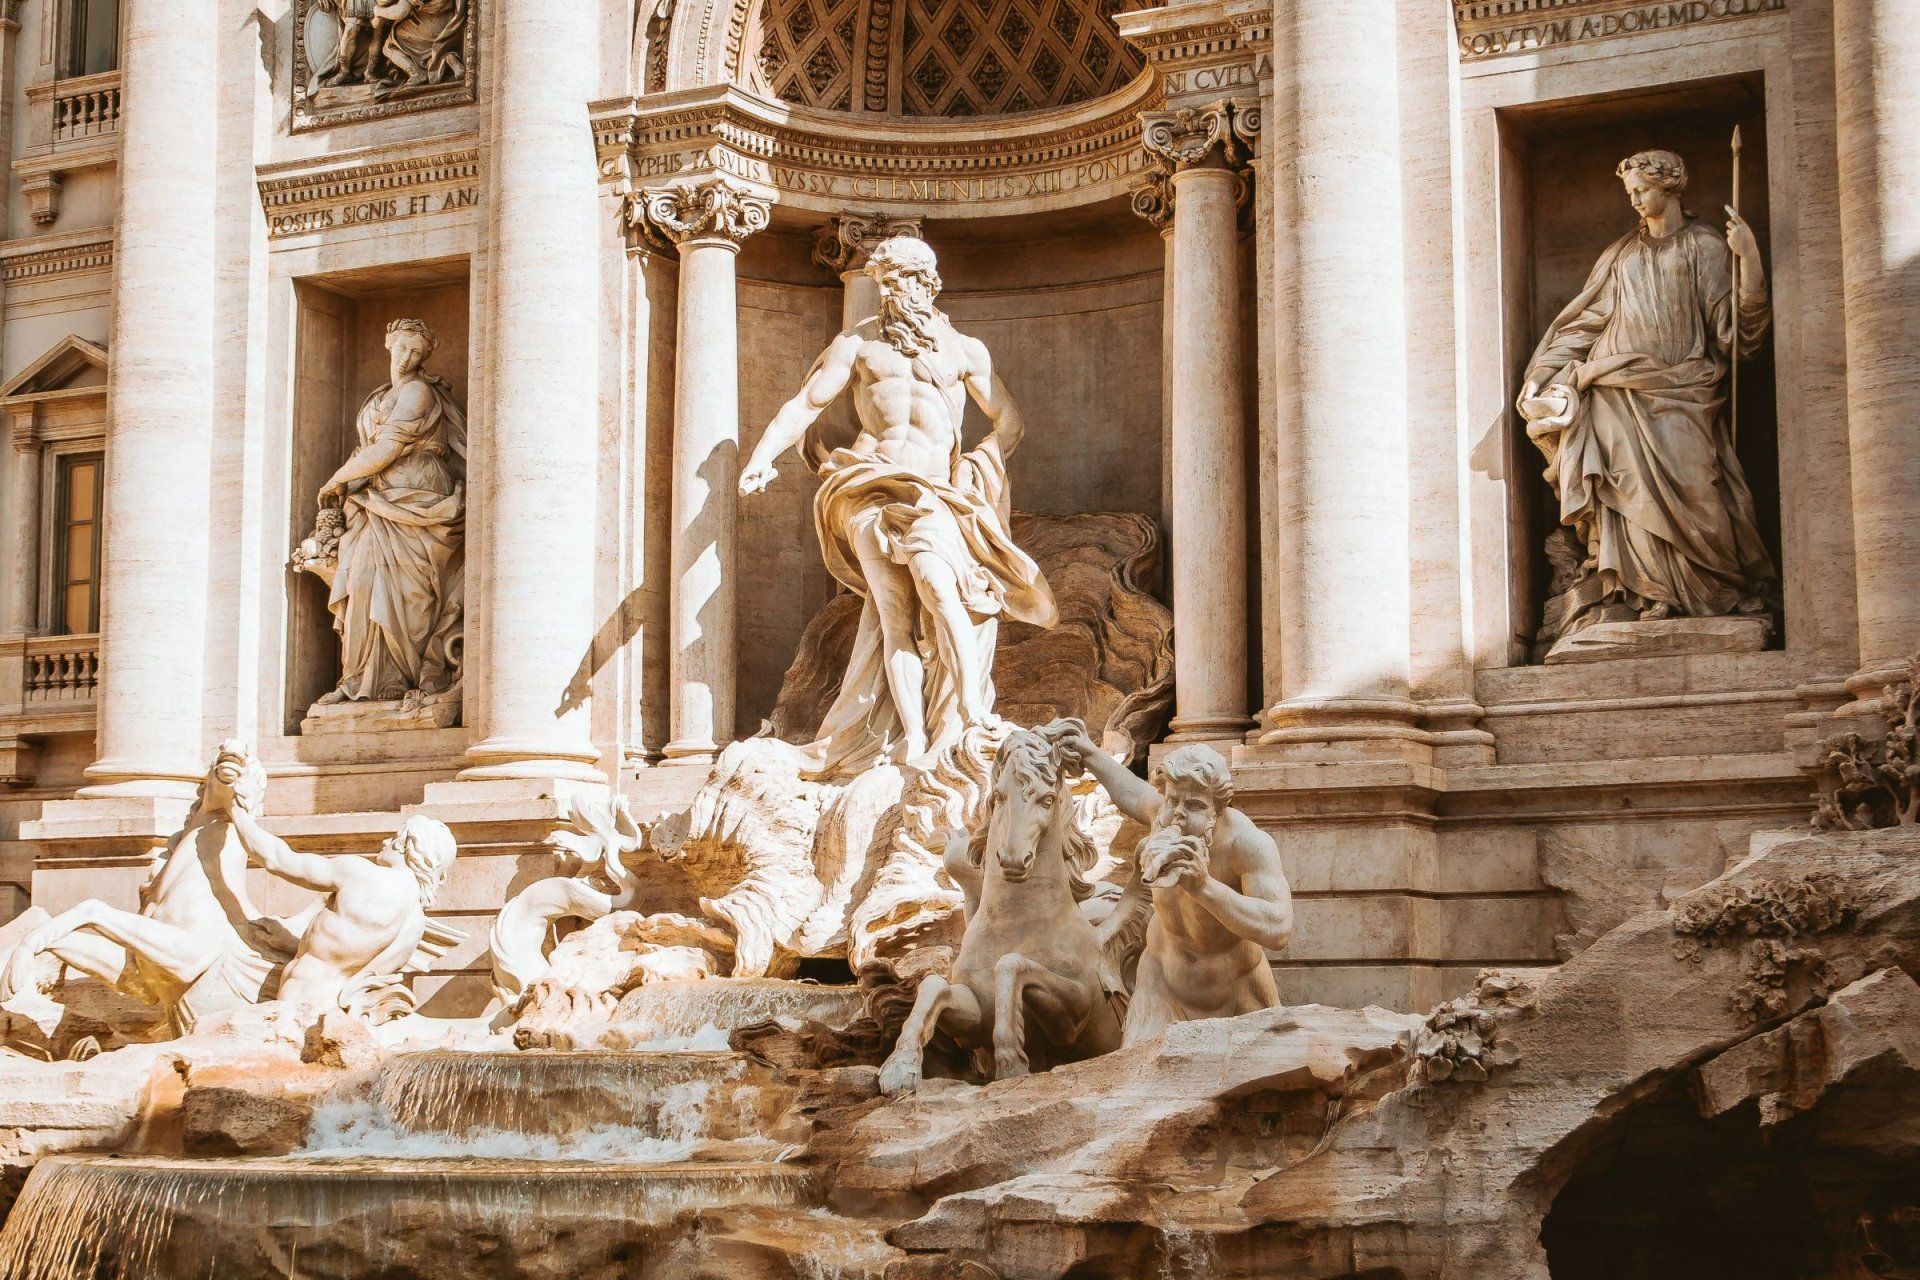 a fountain with a statue of a man standing next to a horse and a statue of a woman